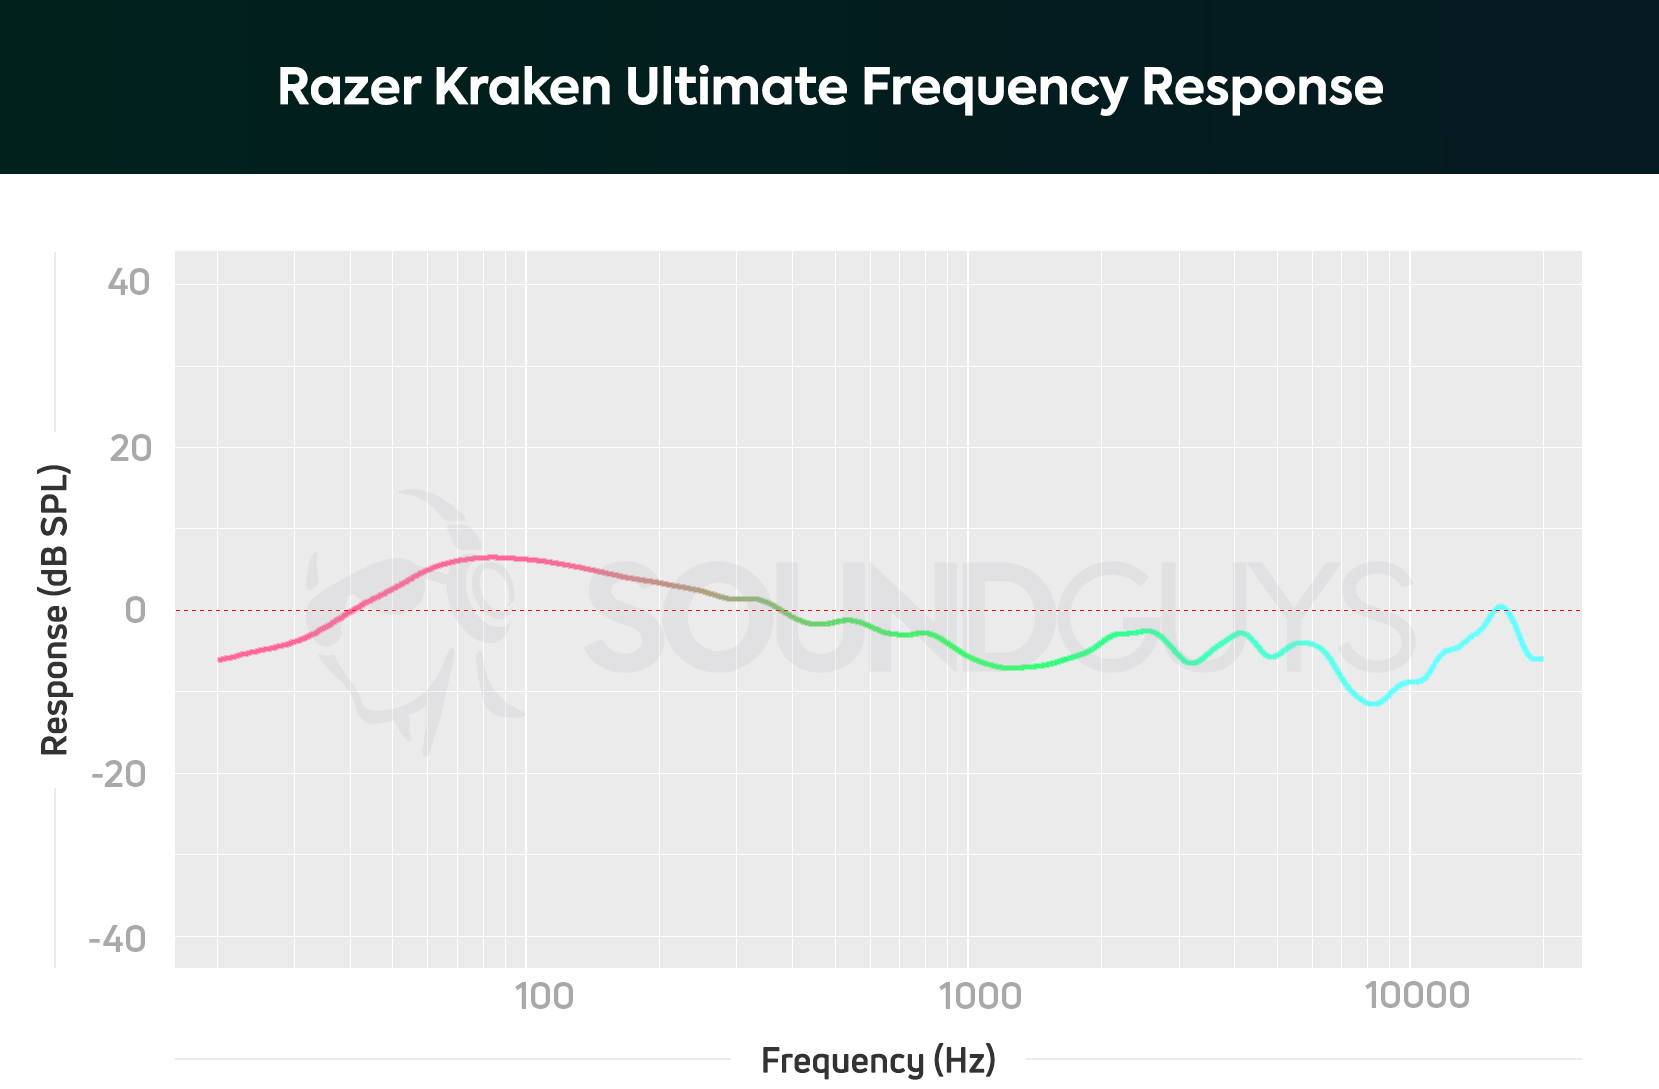 A frequency response chart for the Razer Kraken Ultimate gaming headset